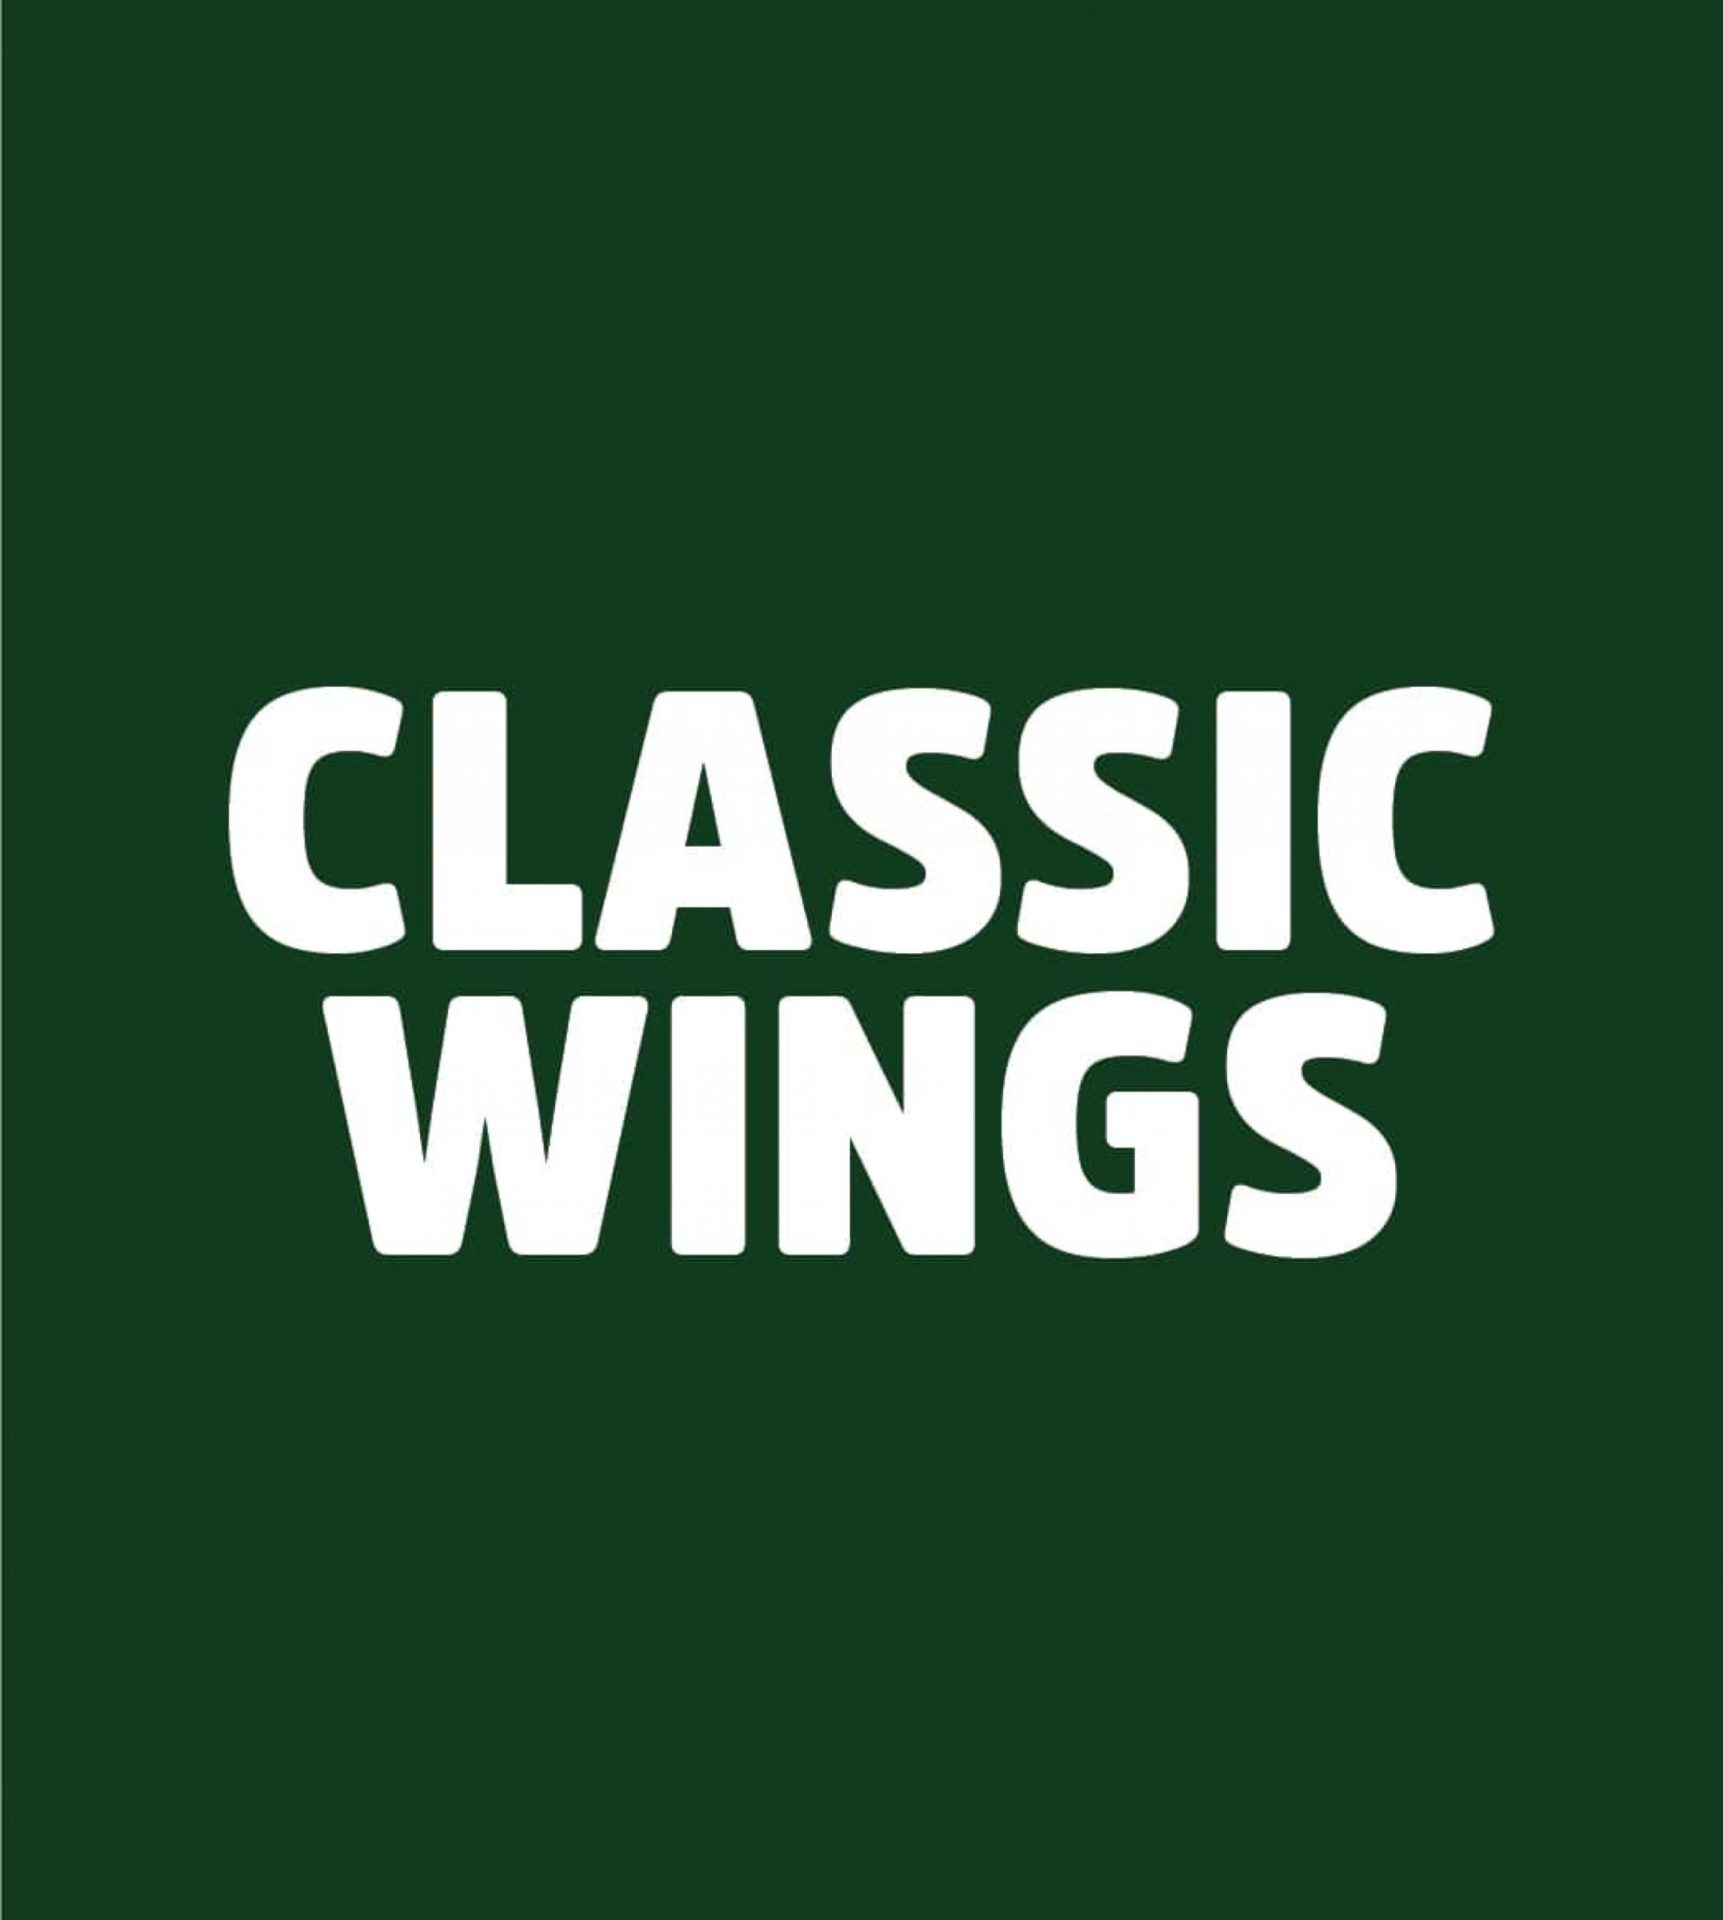 CLASSIC WINGS